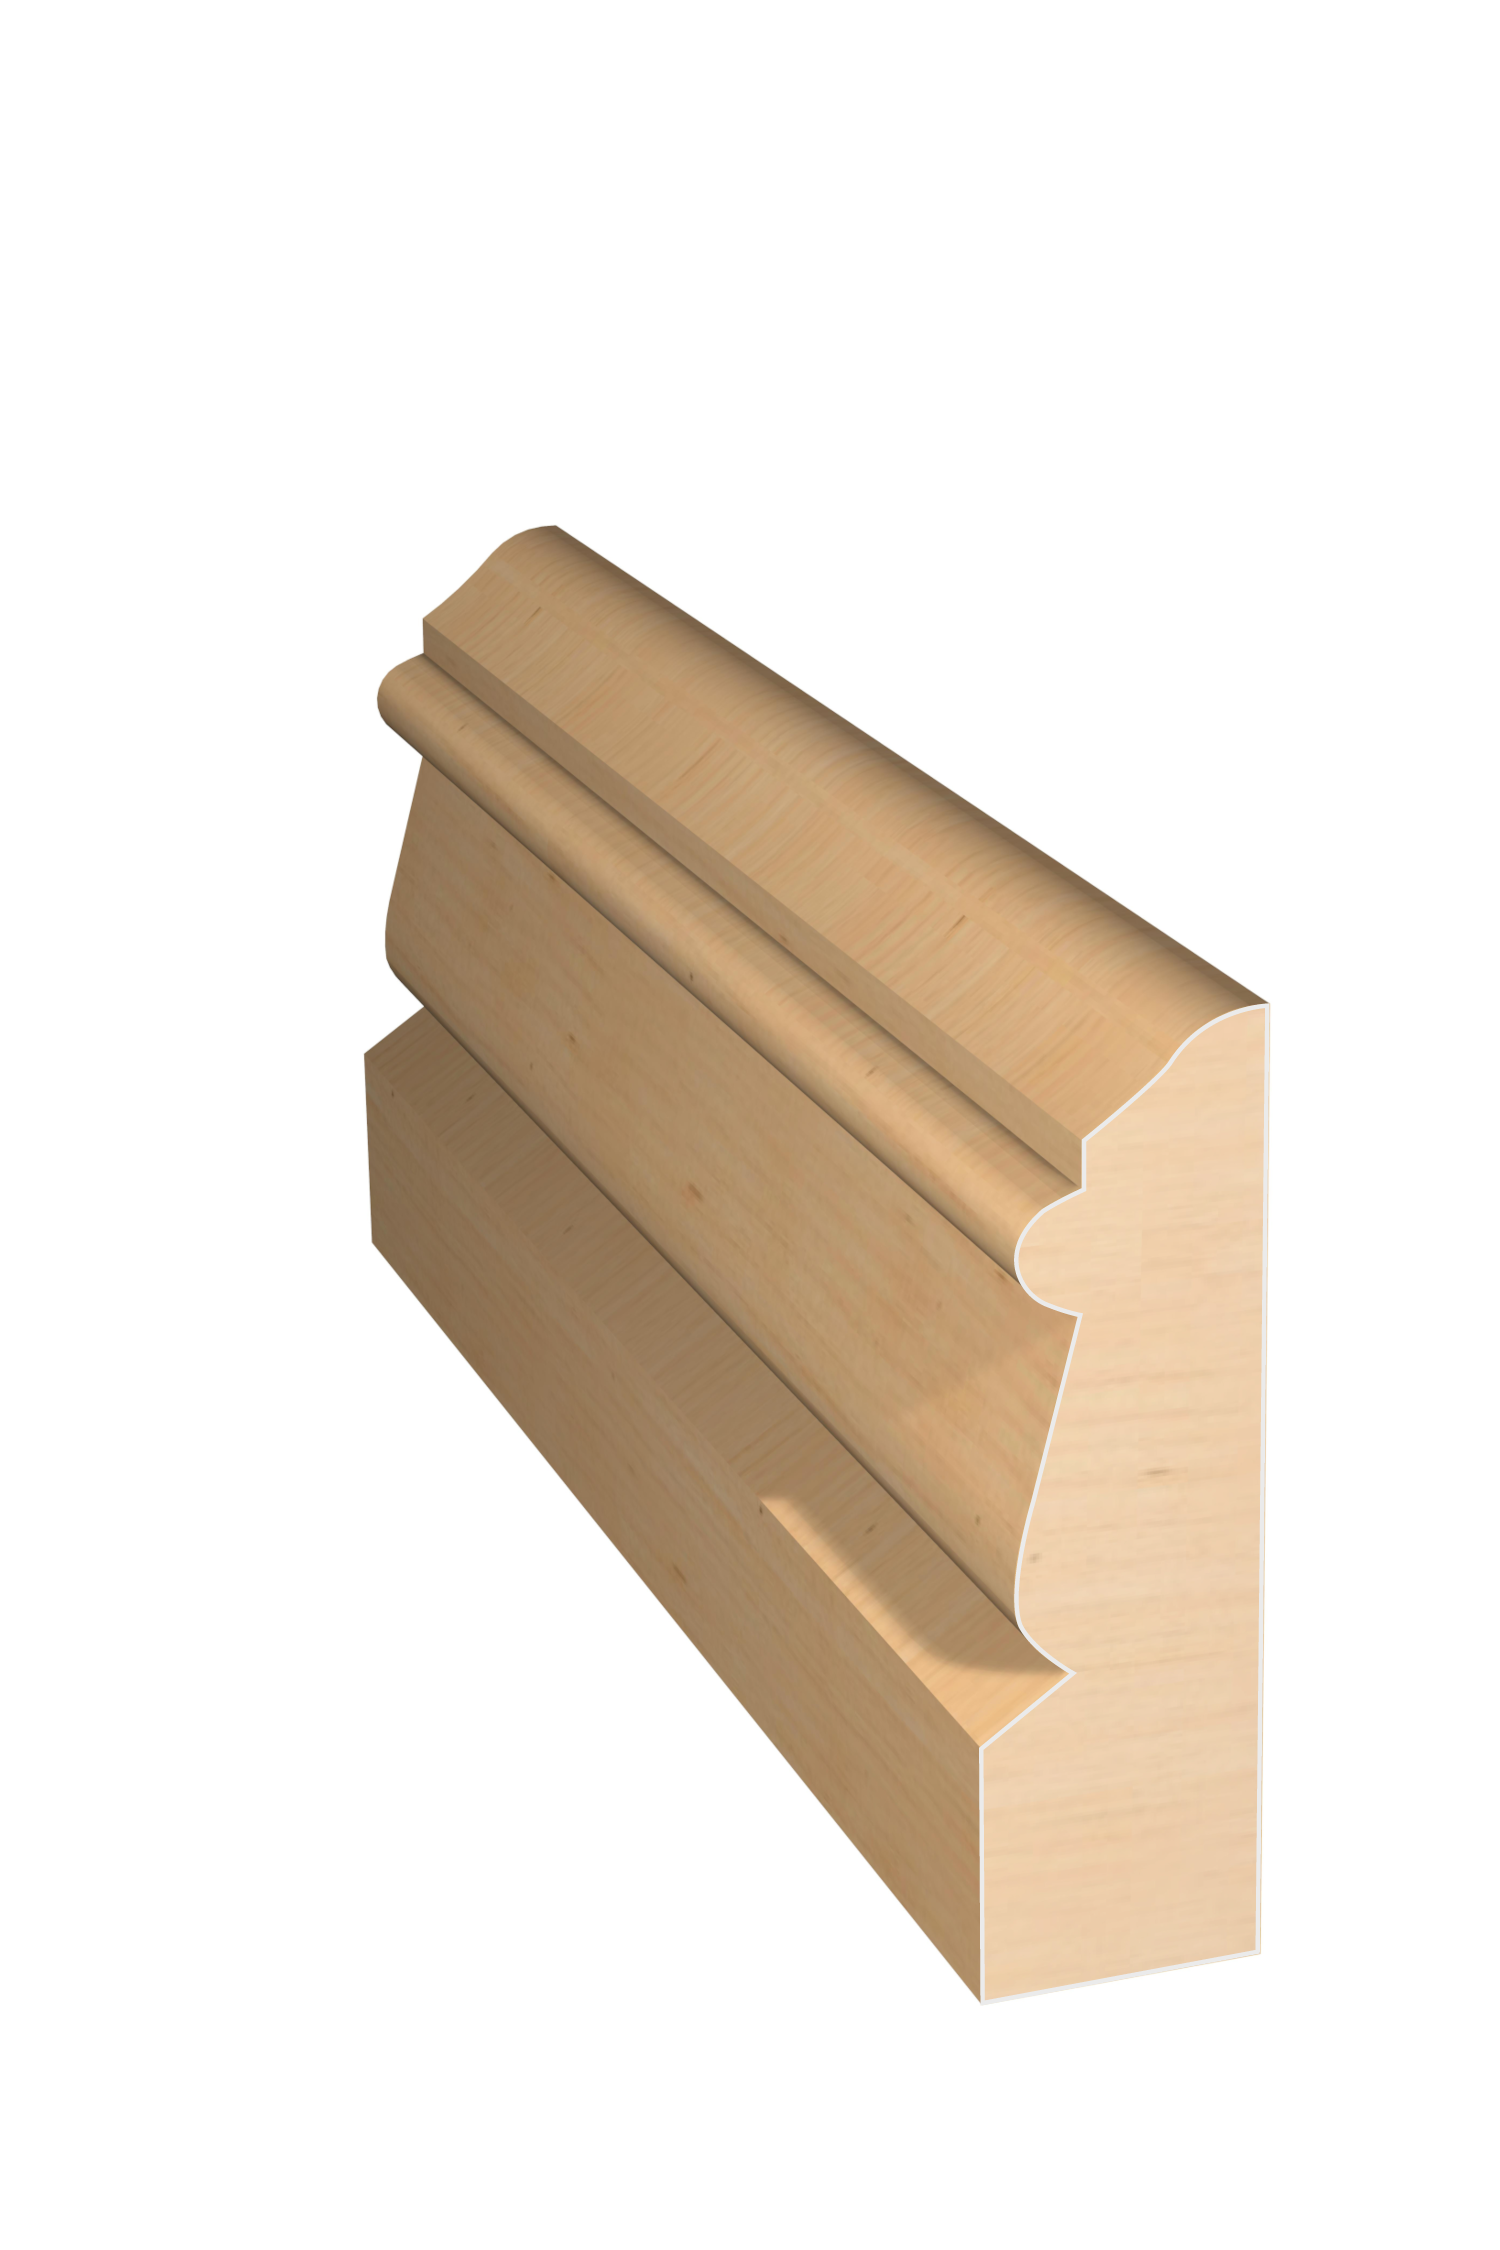 Three dimensional rendering of custom casing wood molding CAPL21218 made by Public Lumber Company in Detroit.